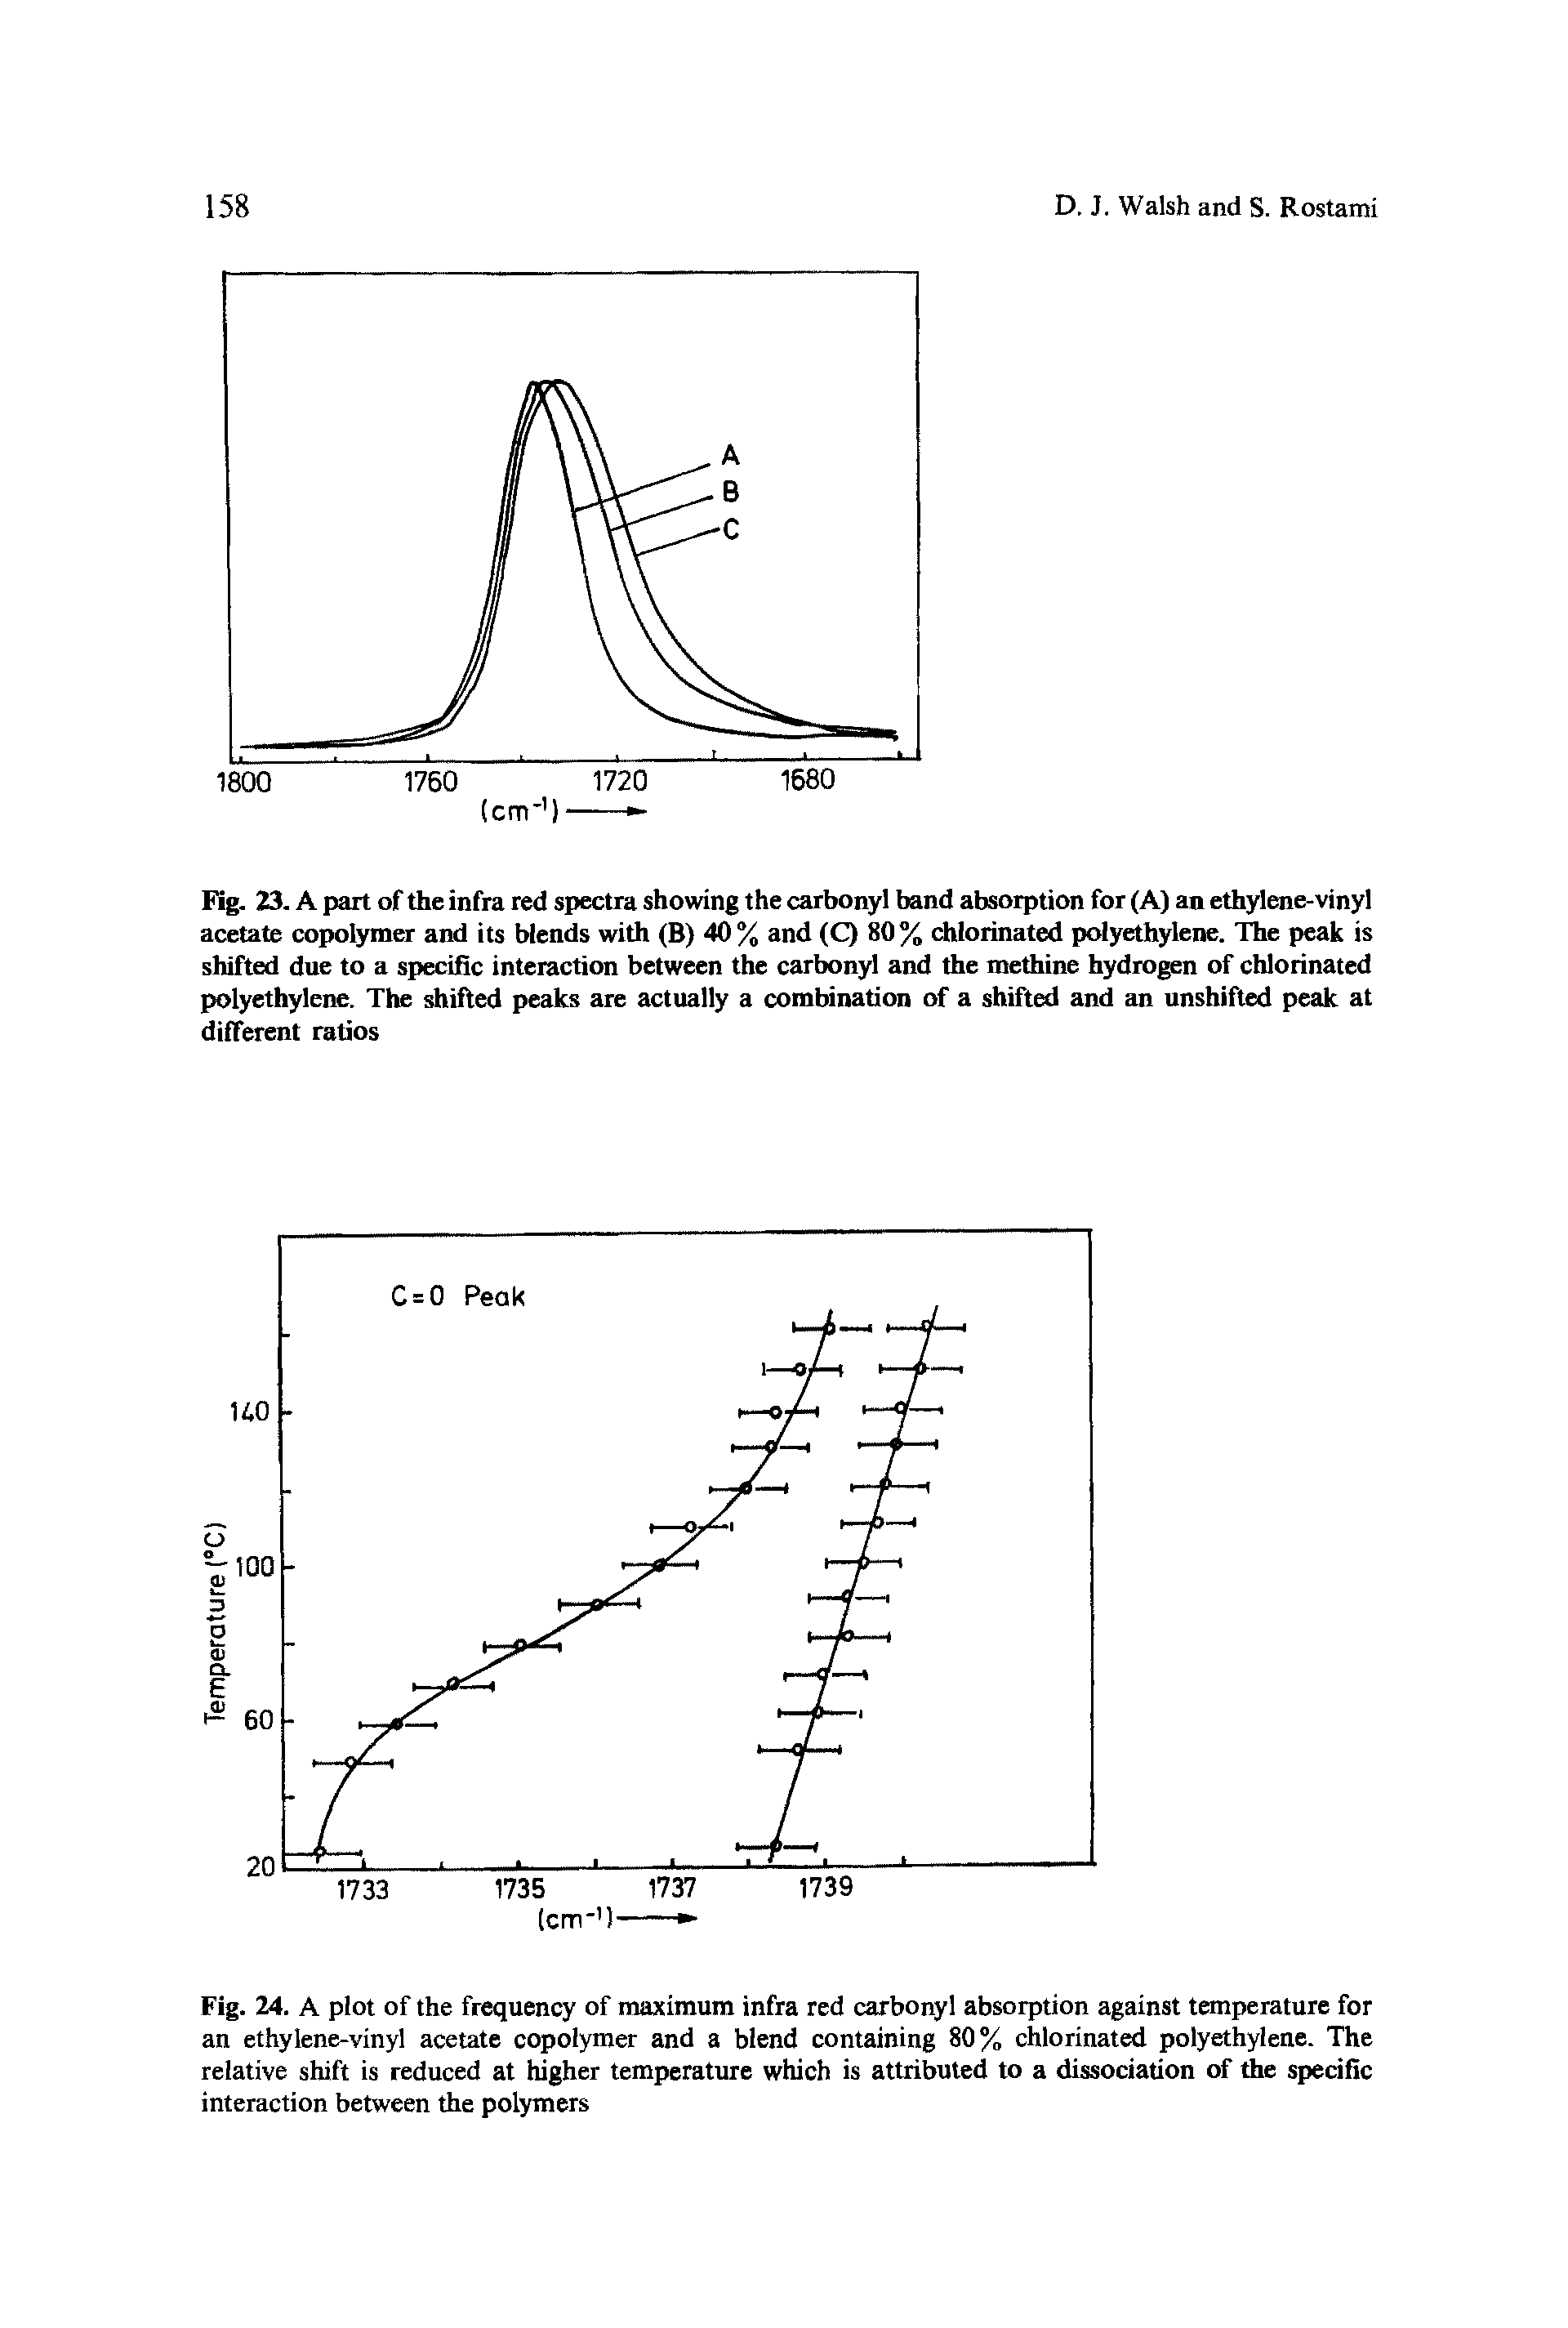 Fig. 23. A part of the infra red spectra showing the carbonyl band absorption for (A) an ethylene-vinyl acetate copolymer and its blends with (B) 40 % and (Q 80% chlorinated polyethylene. The peak is shifted due to a specific interaction between the carbonyl and the methine hydrogen of chlorinated polyethylene. The shifted peaks are actually a combination of a shifted and an unshifted peak at different ratios...